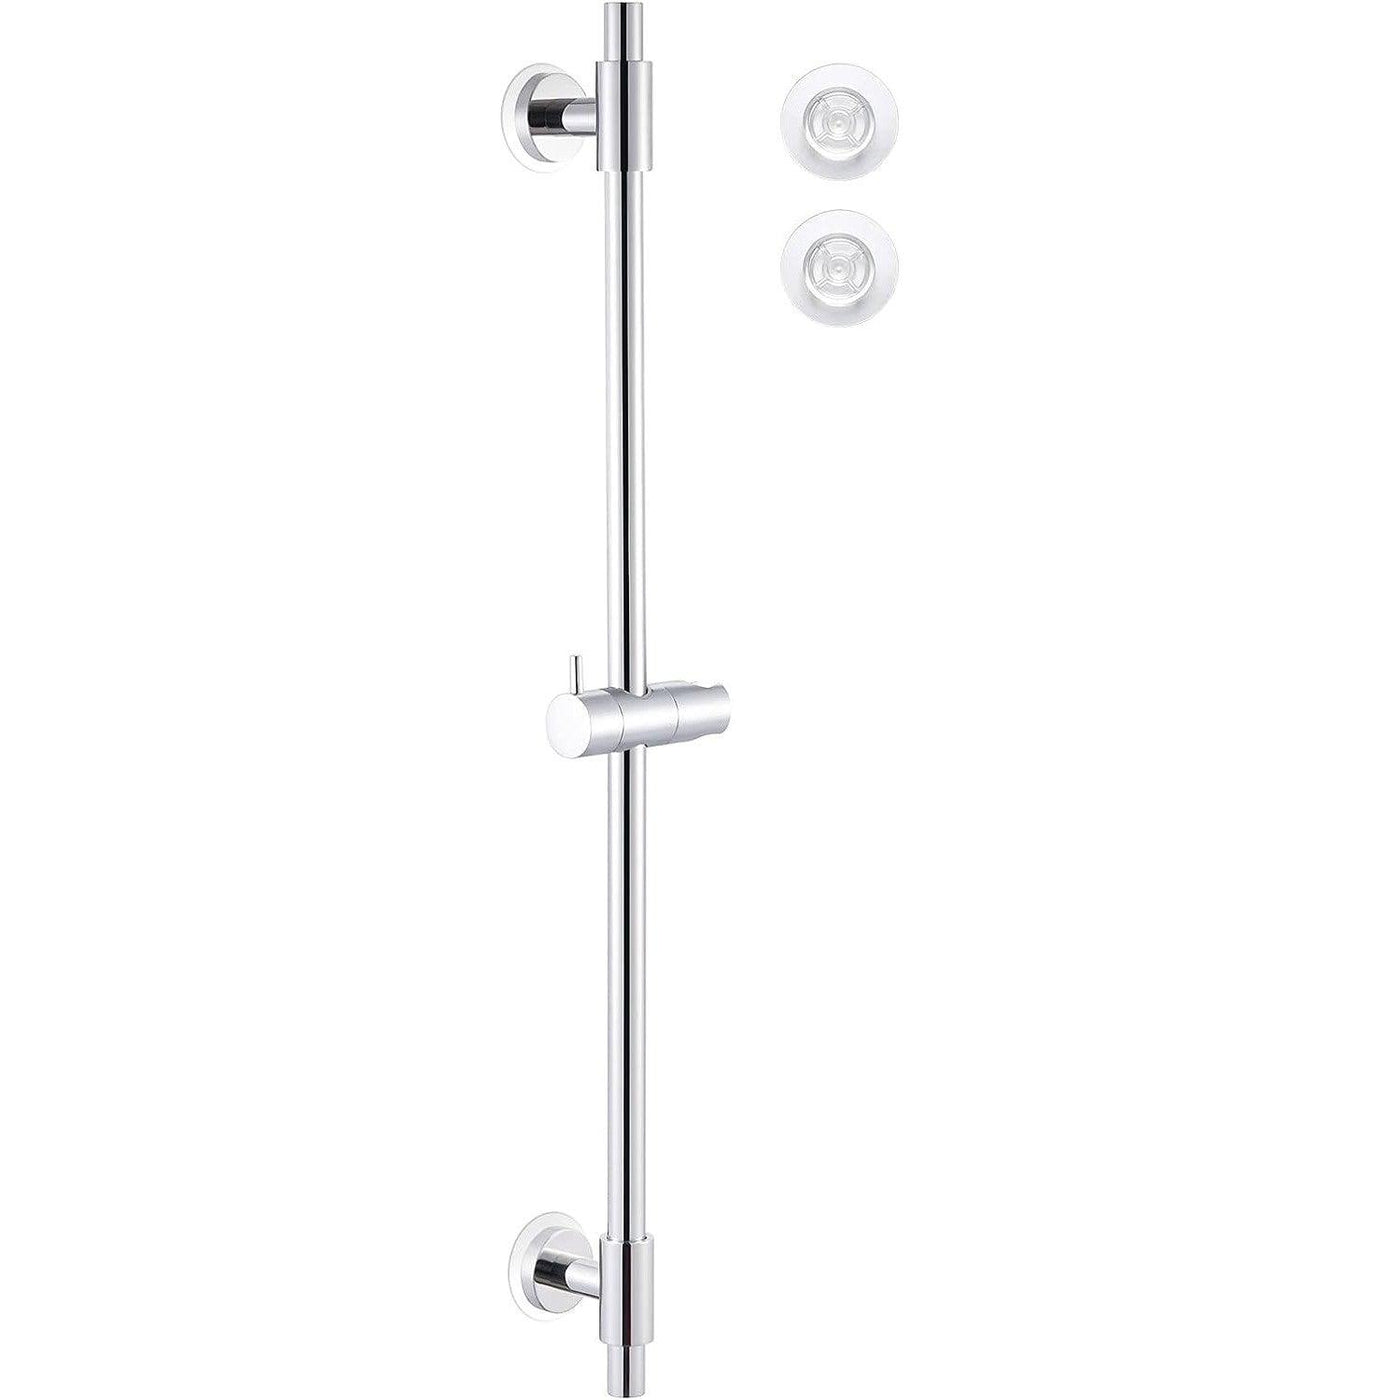 KES Shower Riser Rail Self Adhesive Wall Mounted, Stainless Steel 78CM - Massive Discounts